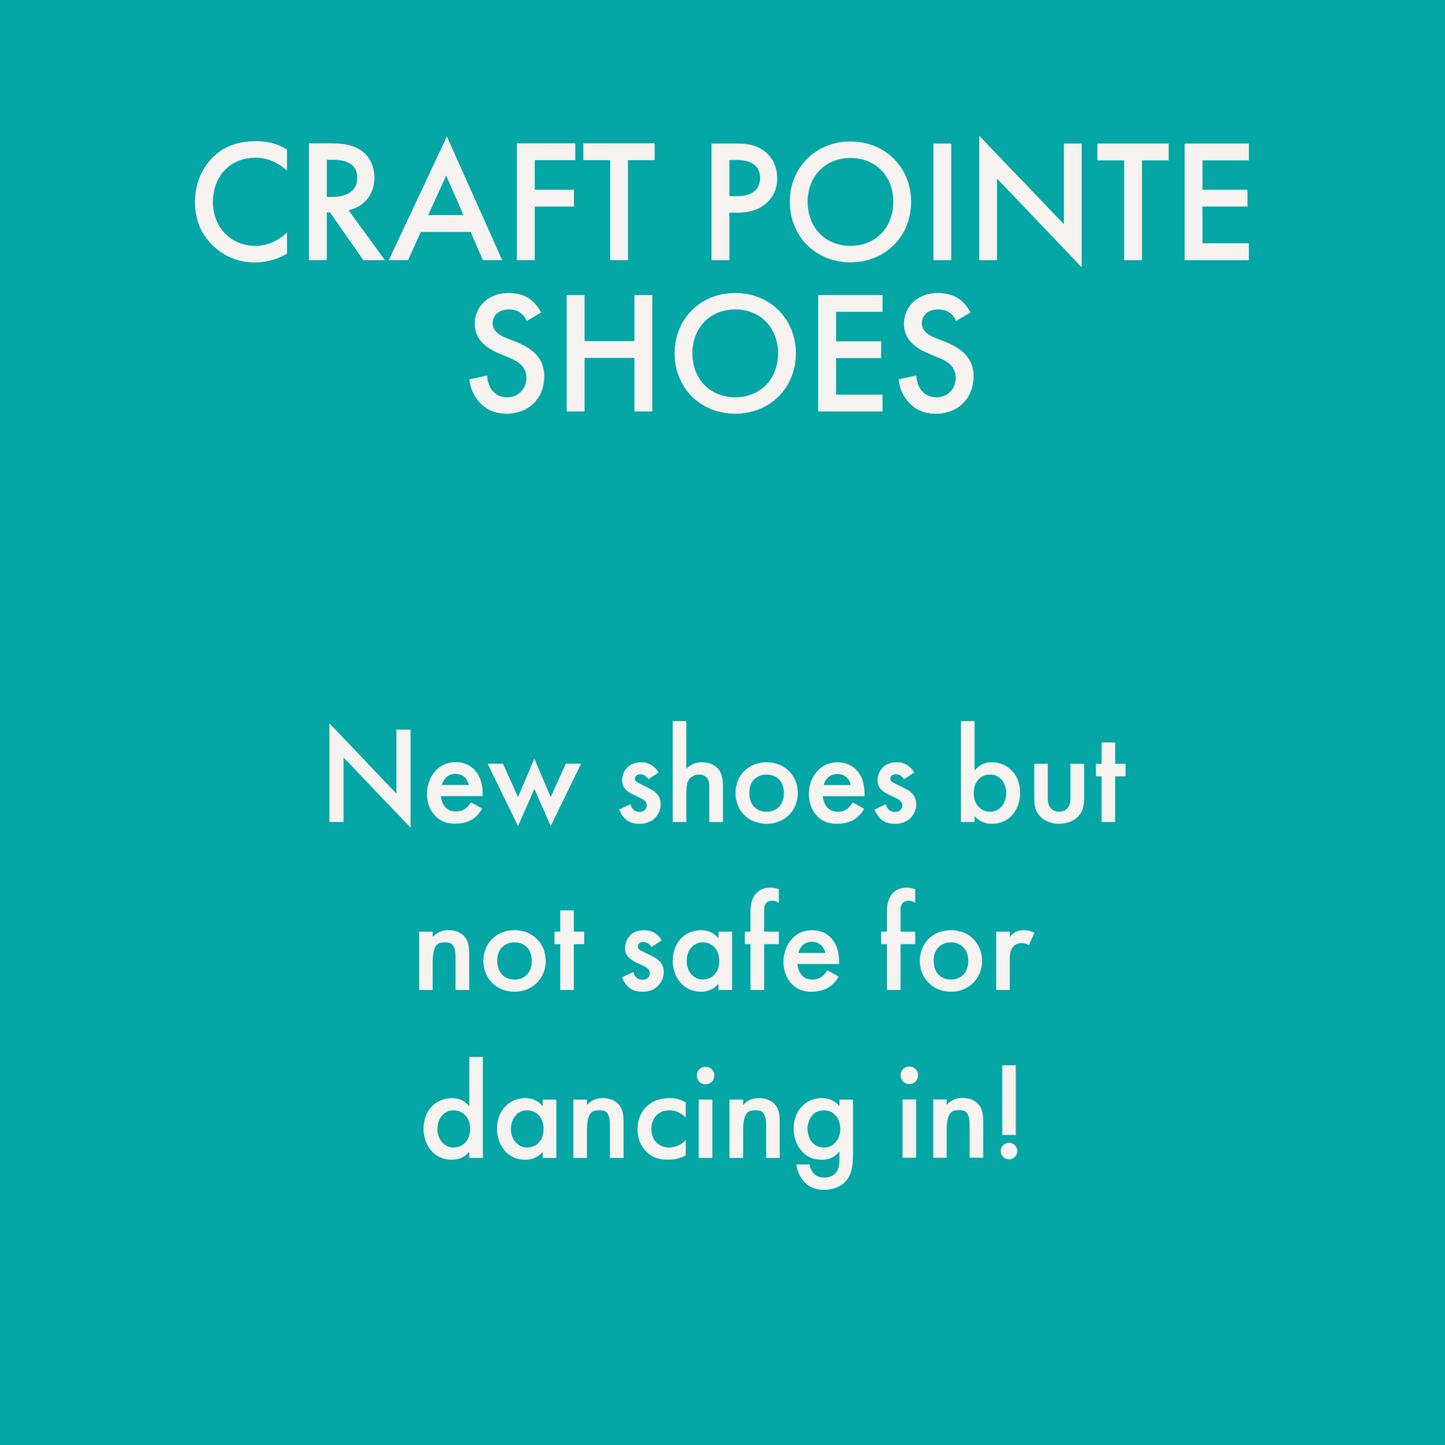 Craft Pointe Shoes